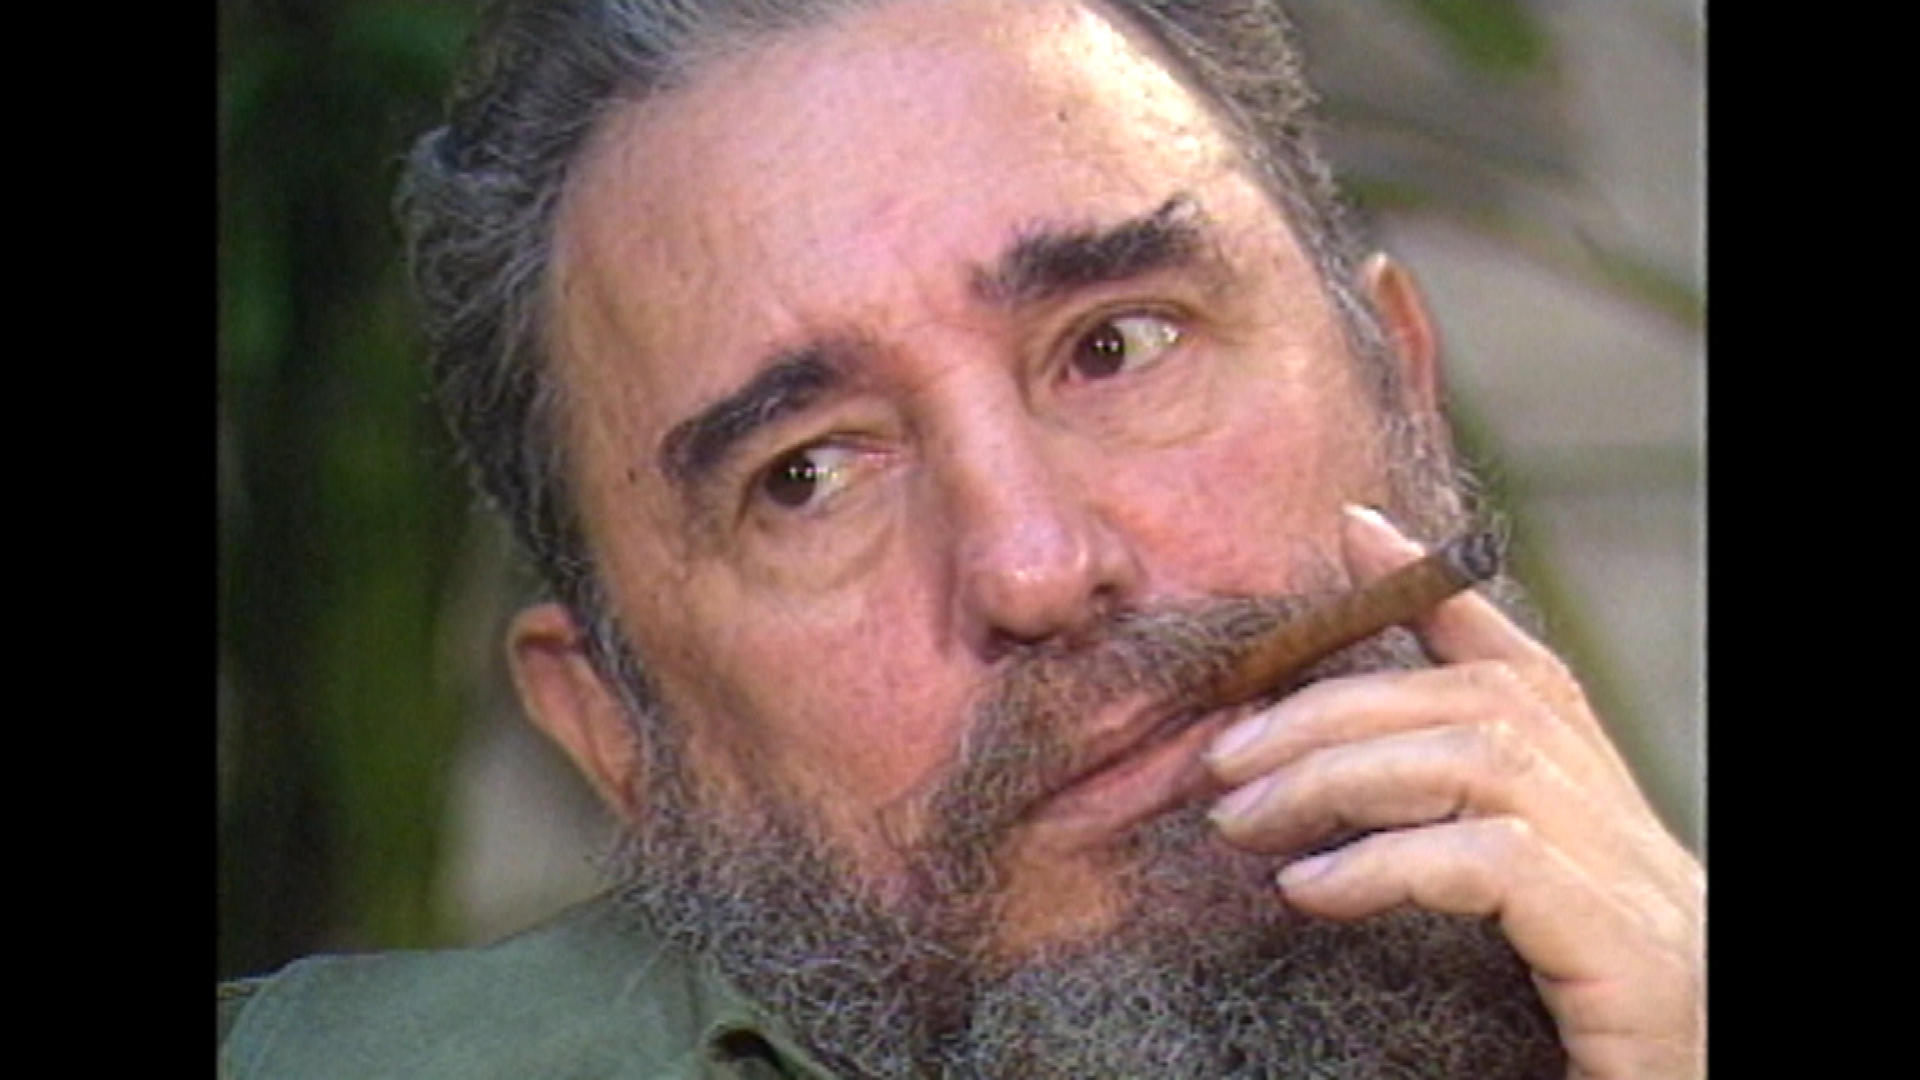 FIDEL LIVES AND WILL LIVE FOREVER